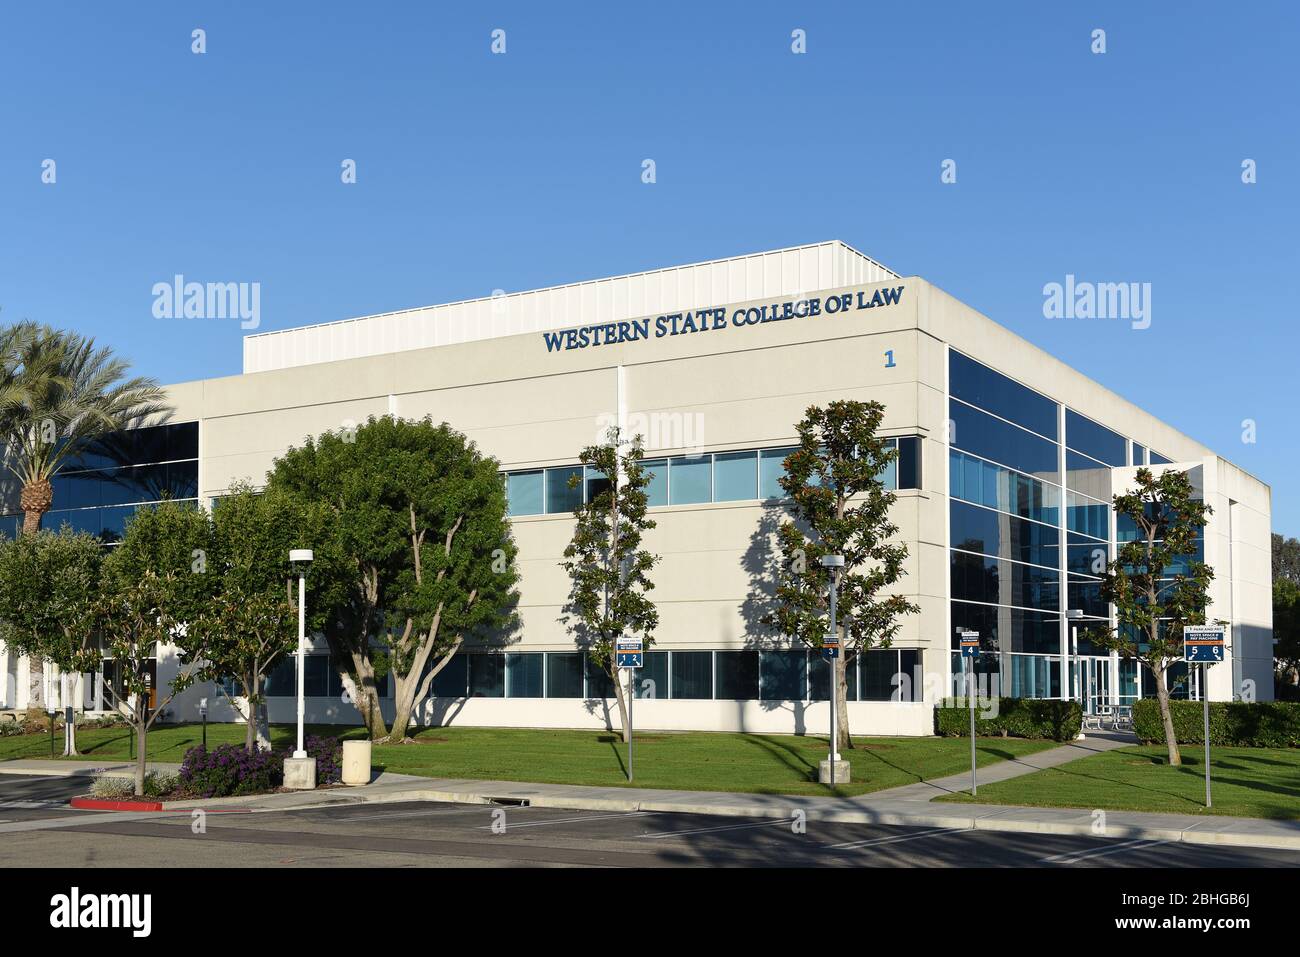 IRVINE, CALIFORNIA - 25 APRIL 2020:The Western State College of Law, Irvine campus building. Stock Photo